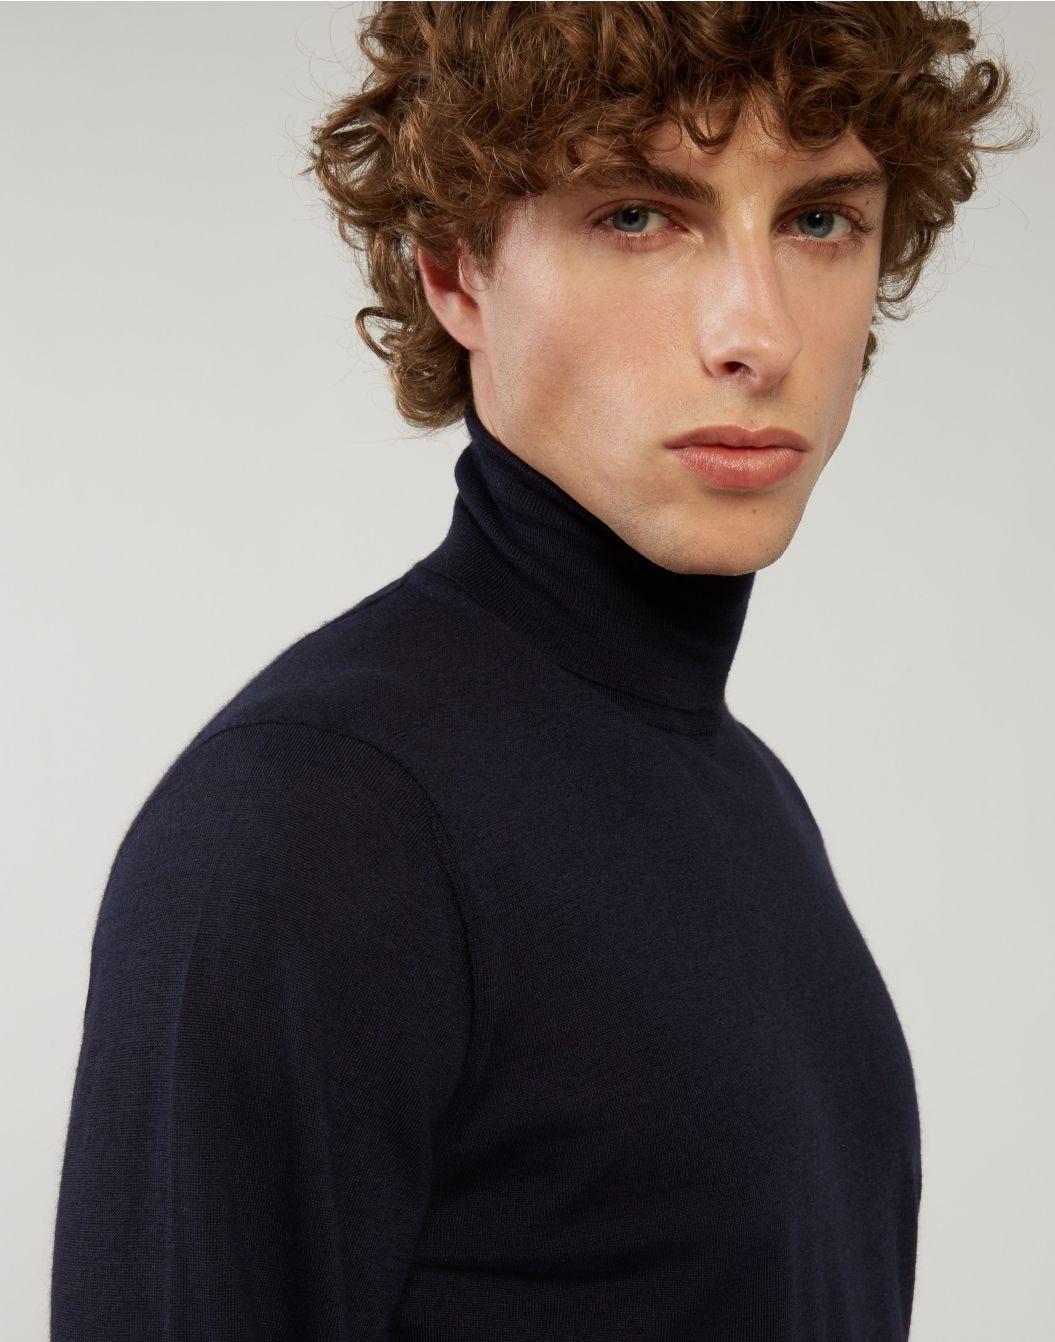 Blue turtleneck in cashmere, silk and wool